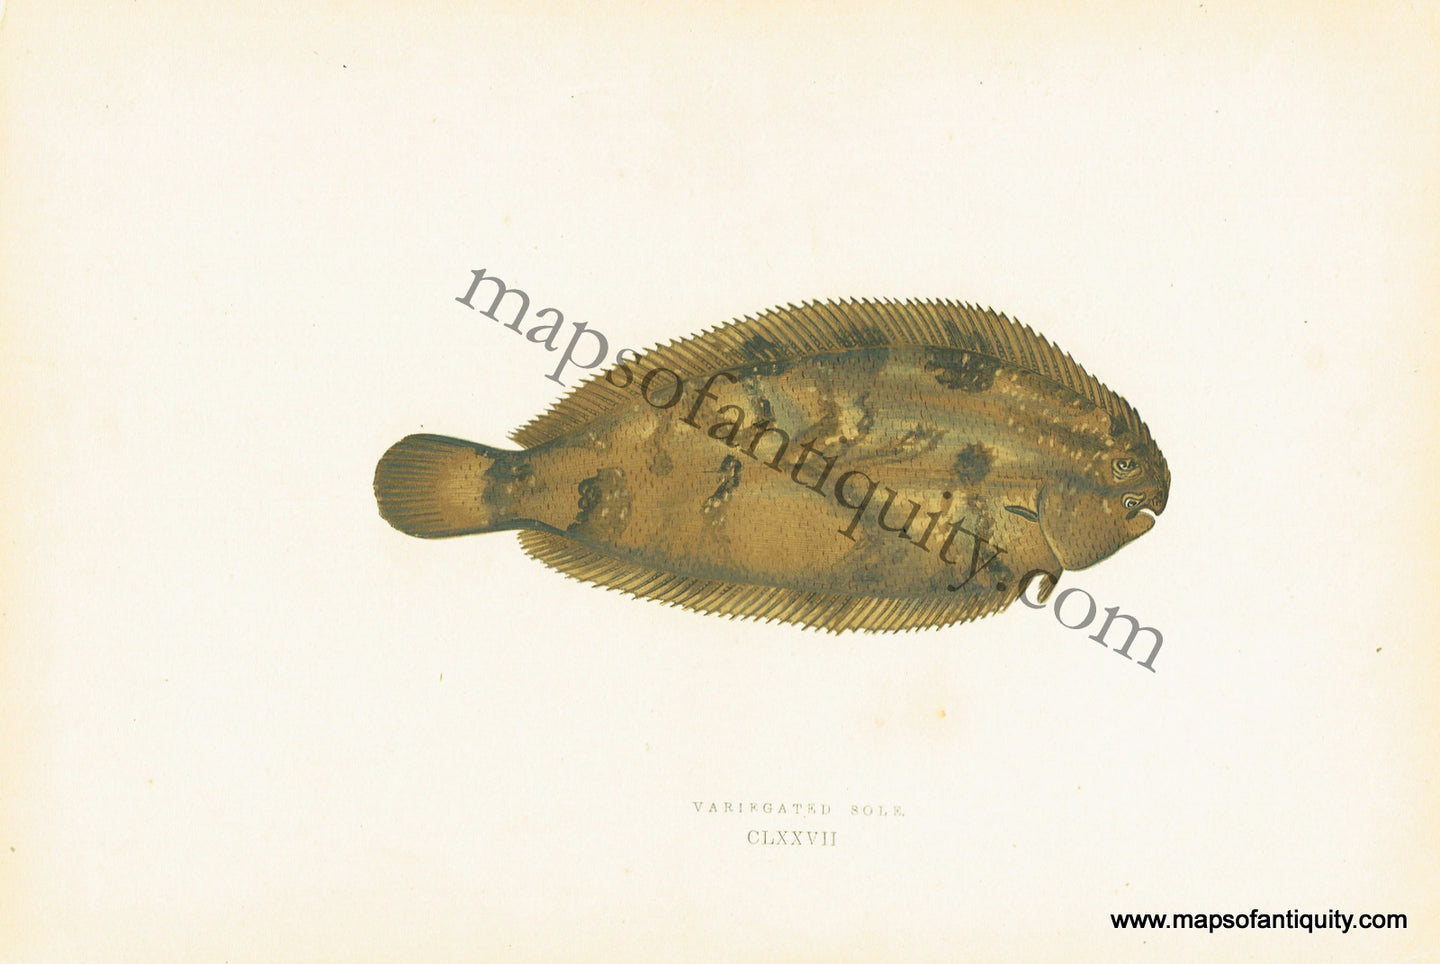 Antique-Colored-Litho-Print-Variegated-Sole-CLXXVII-Natural-History-Prints-Fish-1877-Couch-Maps-Of-Antiquity